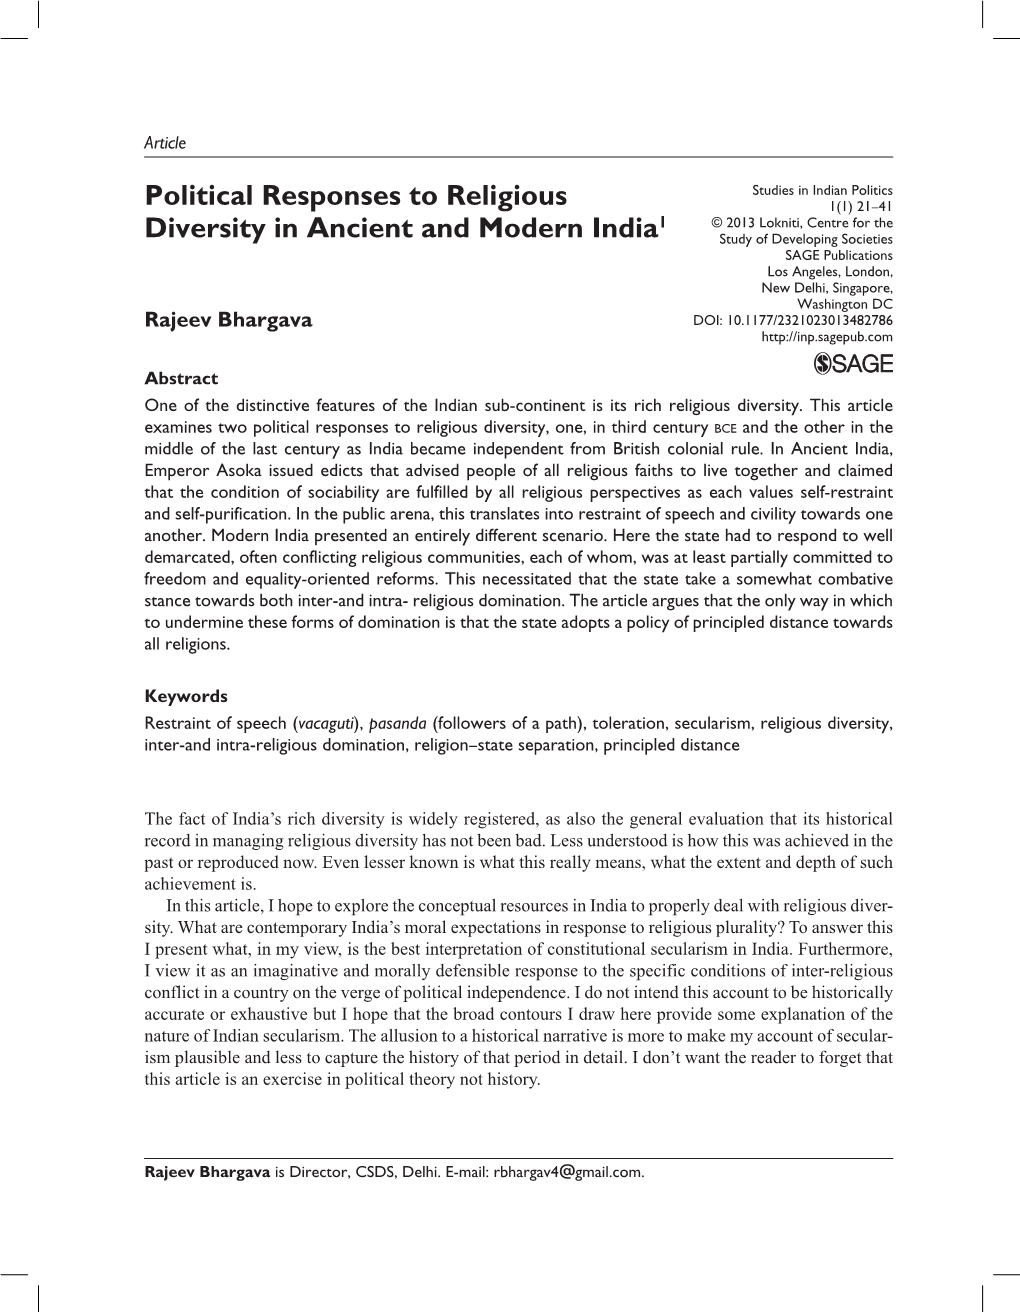 Political Responses to Religious Diversity in Ancient and Modern